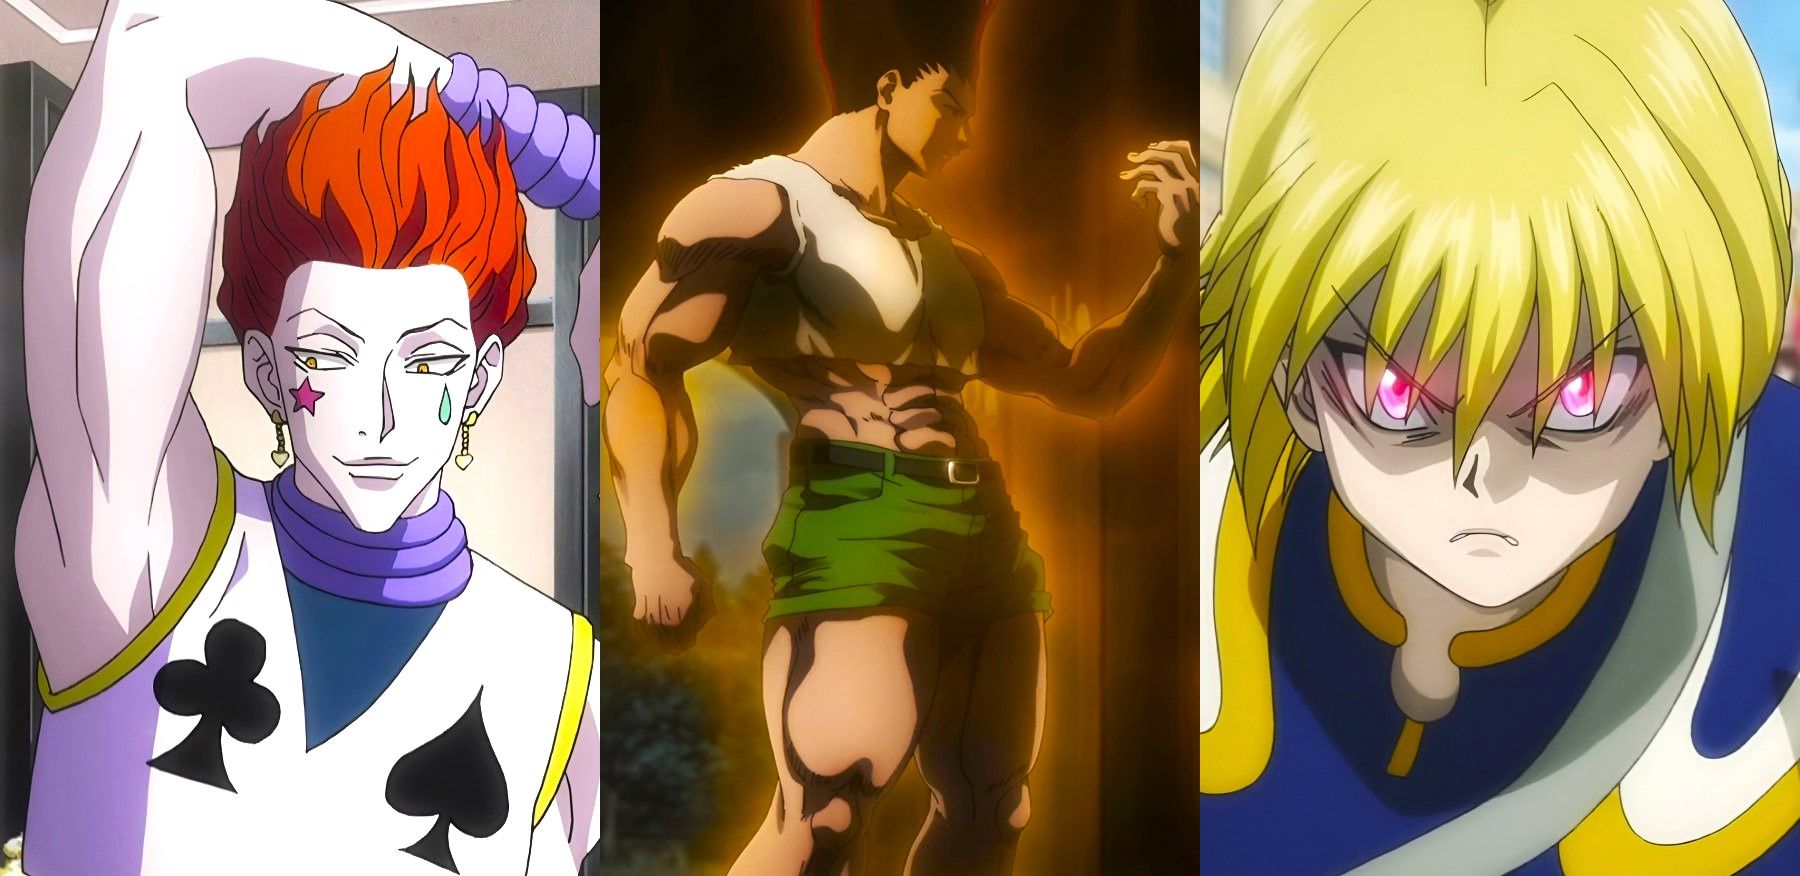 A man with red hair and clown makeup lifts his hand behind his head, a muscular man surrounded by golden aura looks at his hand, and a boy with blonde hair and glowing red eyes gets ready to attack.